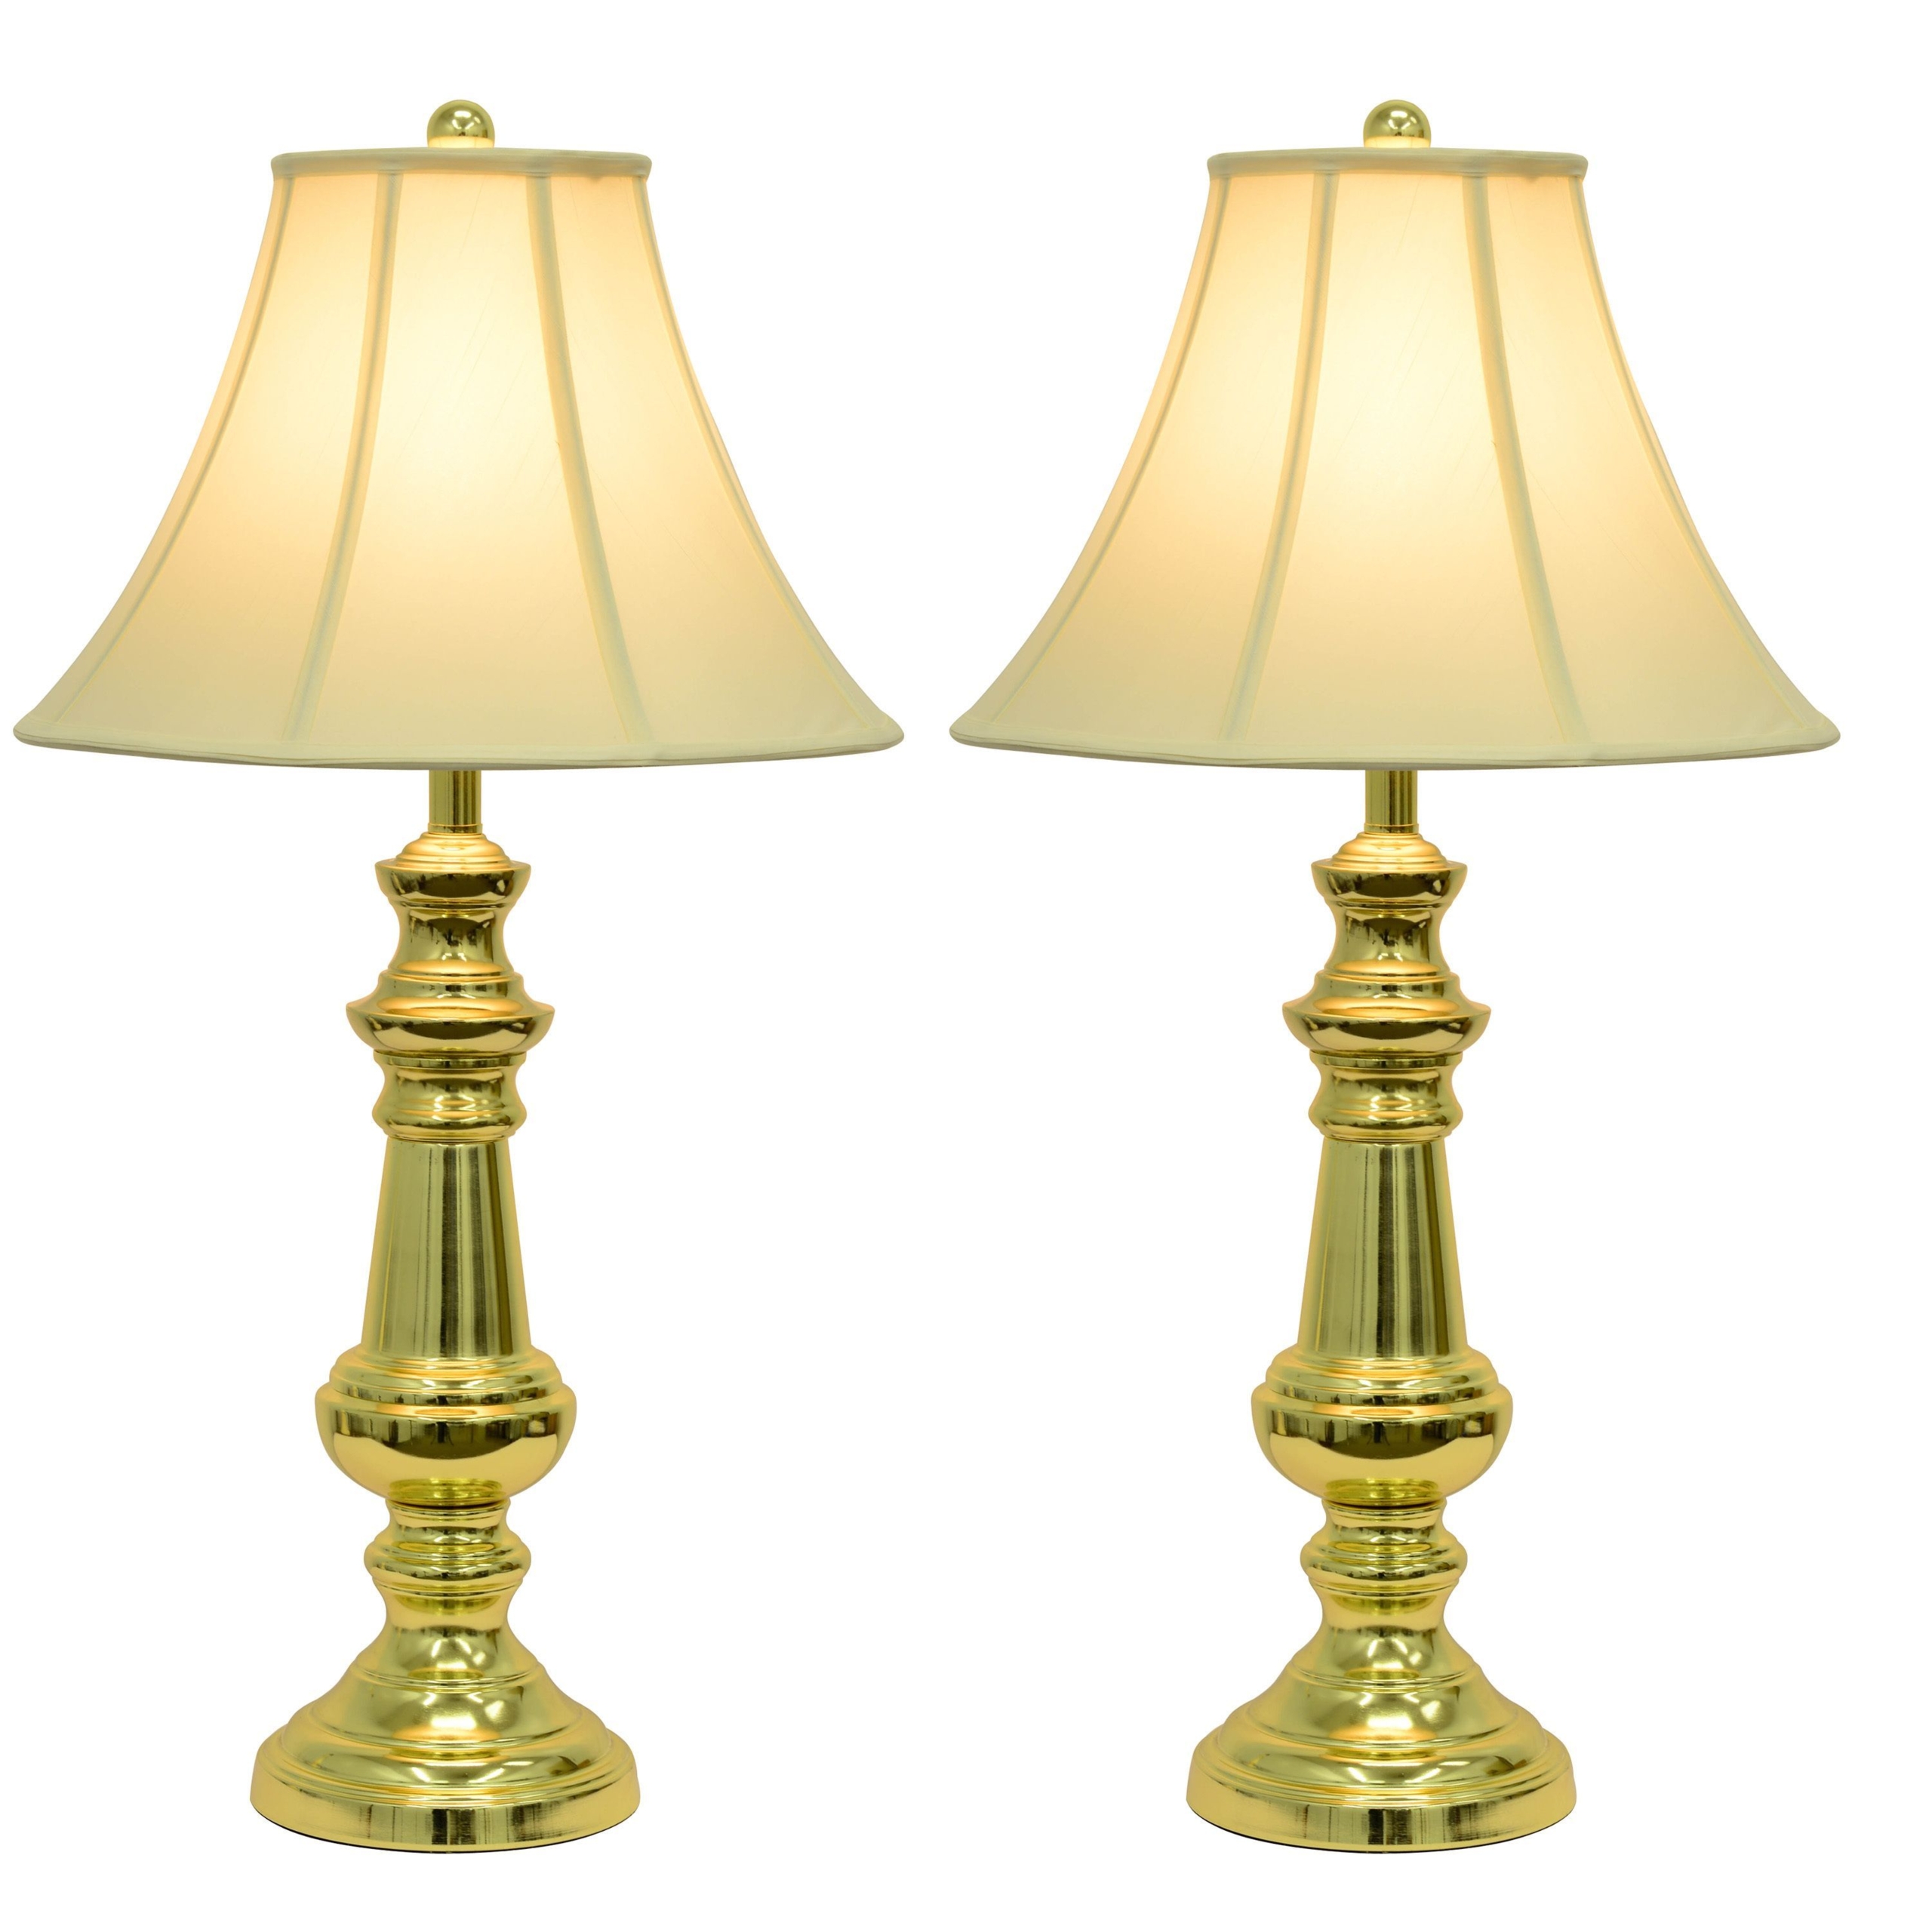 Hunt and company touch control polished brass table lamps set